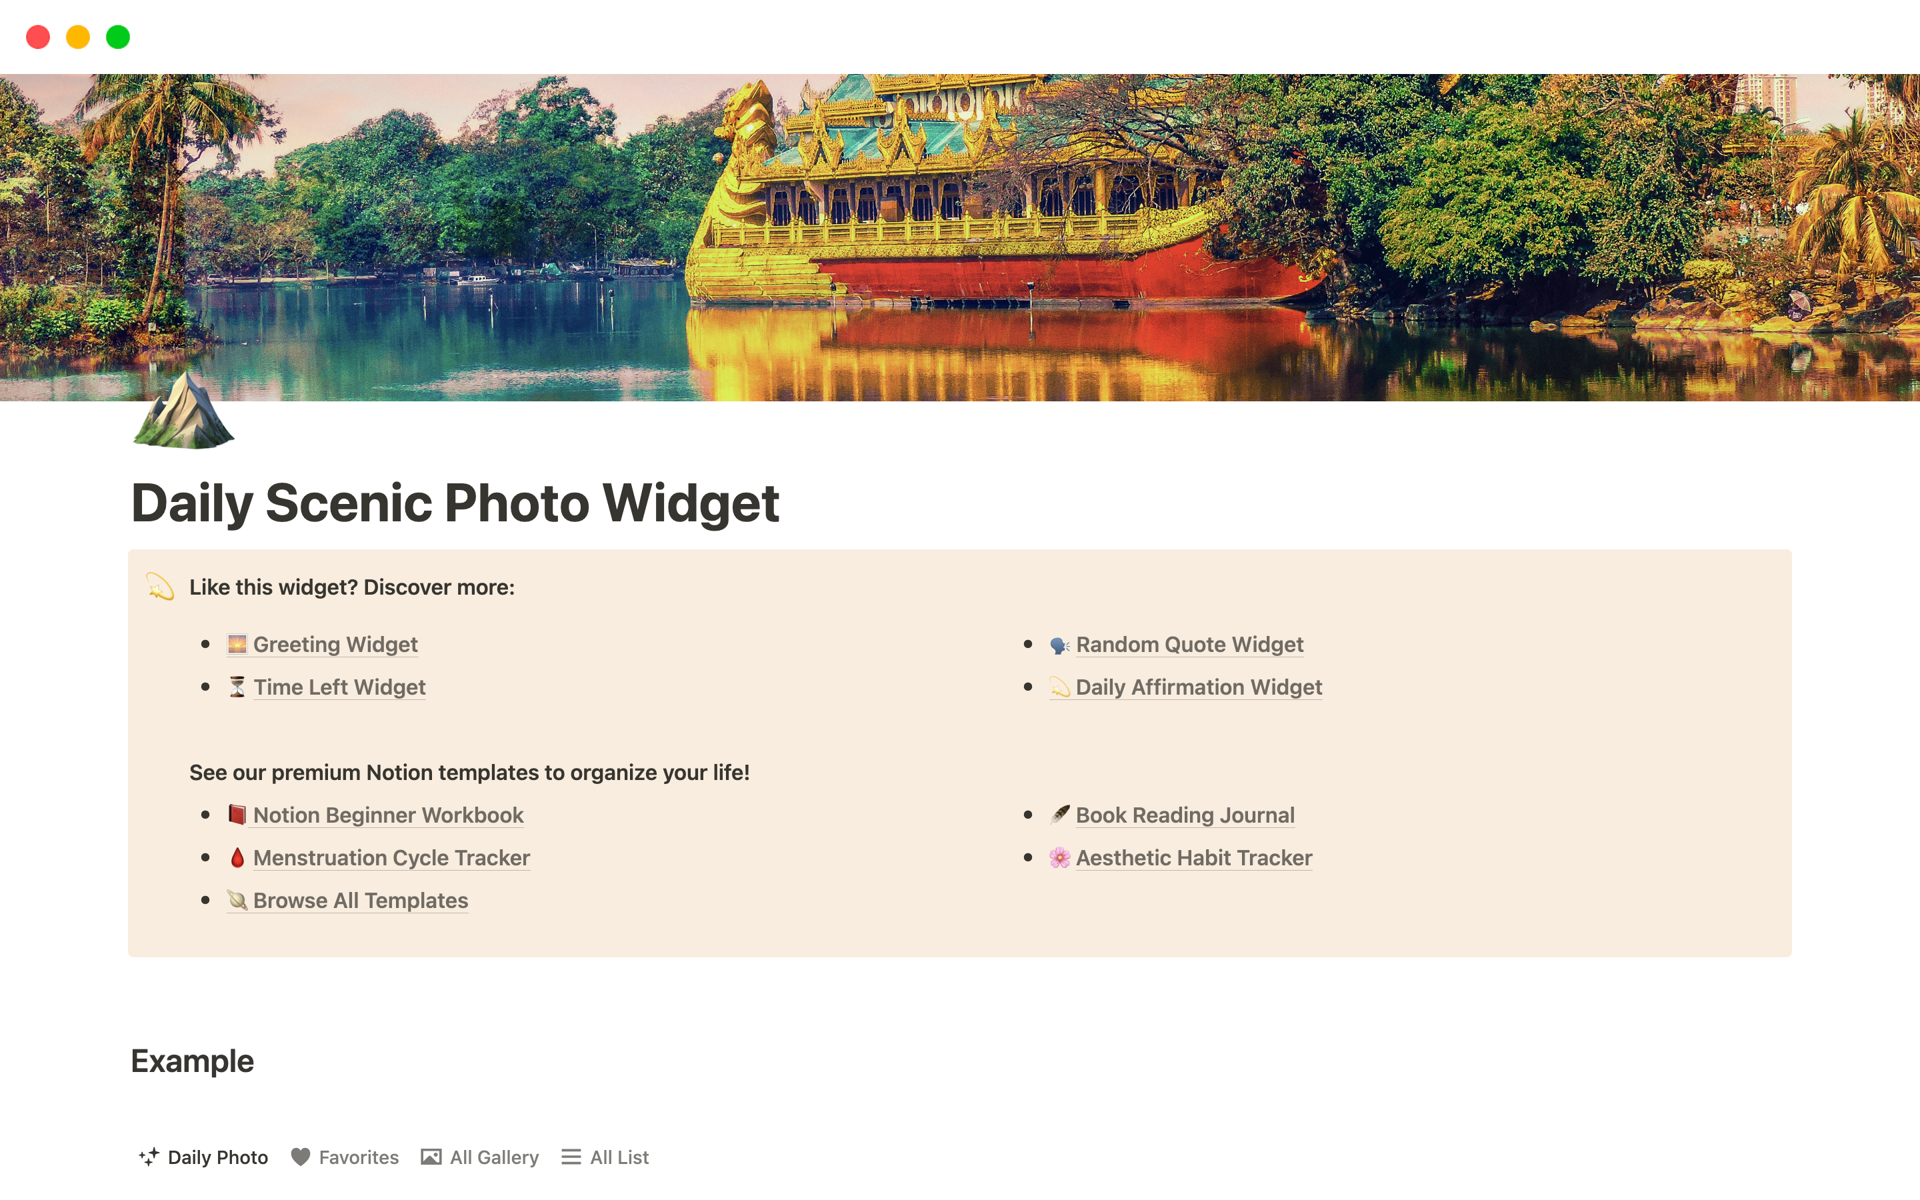 Have a new wonderful scenic image every day on your Notion workspace with this widget